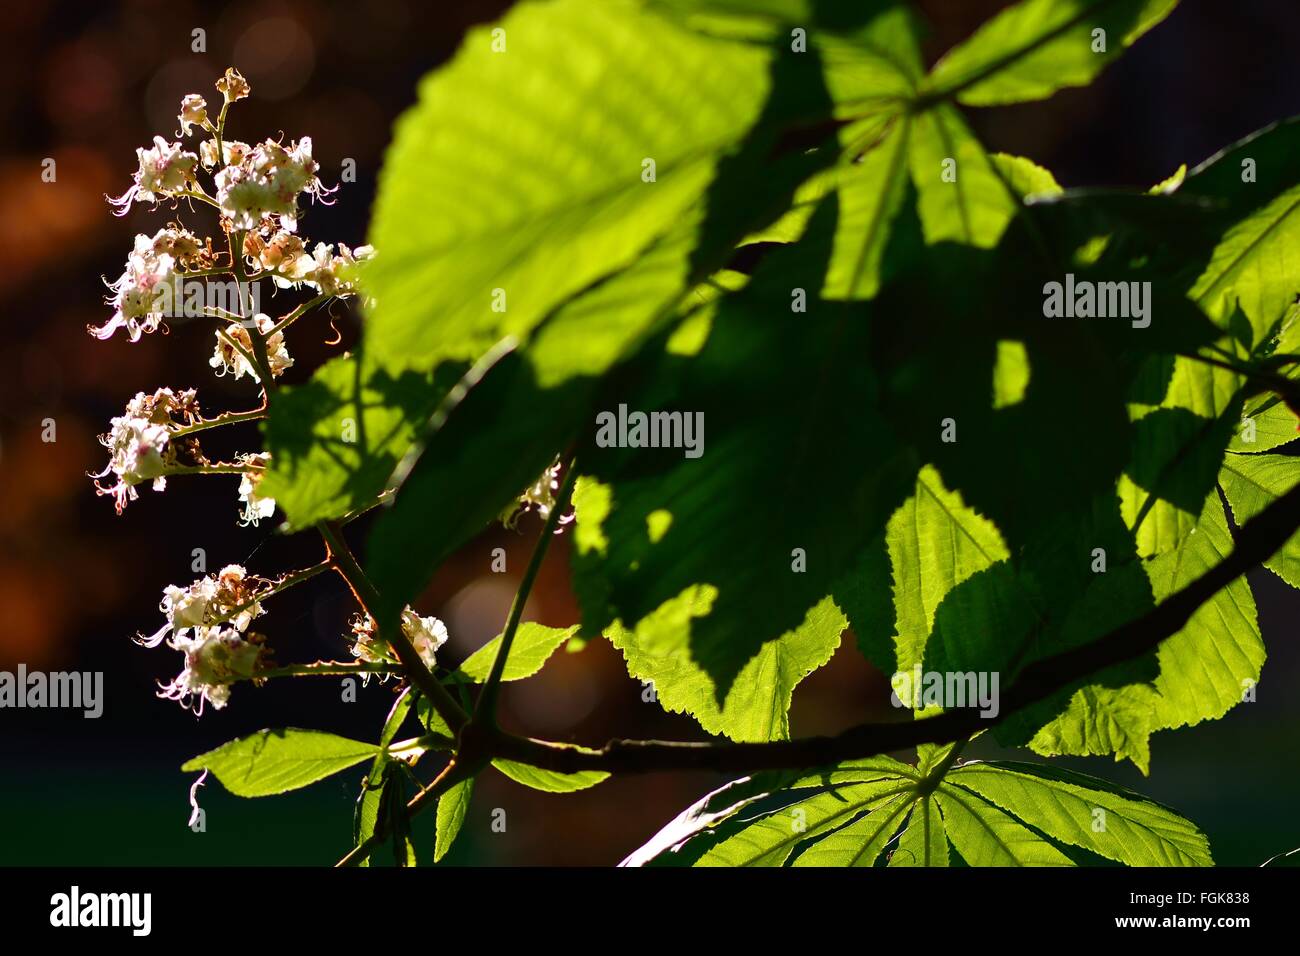 Horse chestnut (Aesculus hippocastanum). Backlit flower of this tree in the family Sapindaceae, backlight by the sun Stock Photo